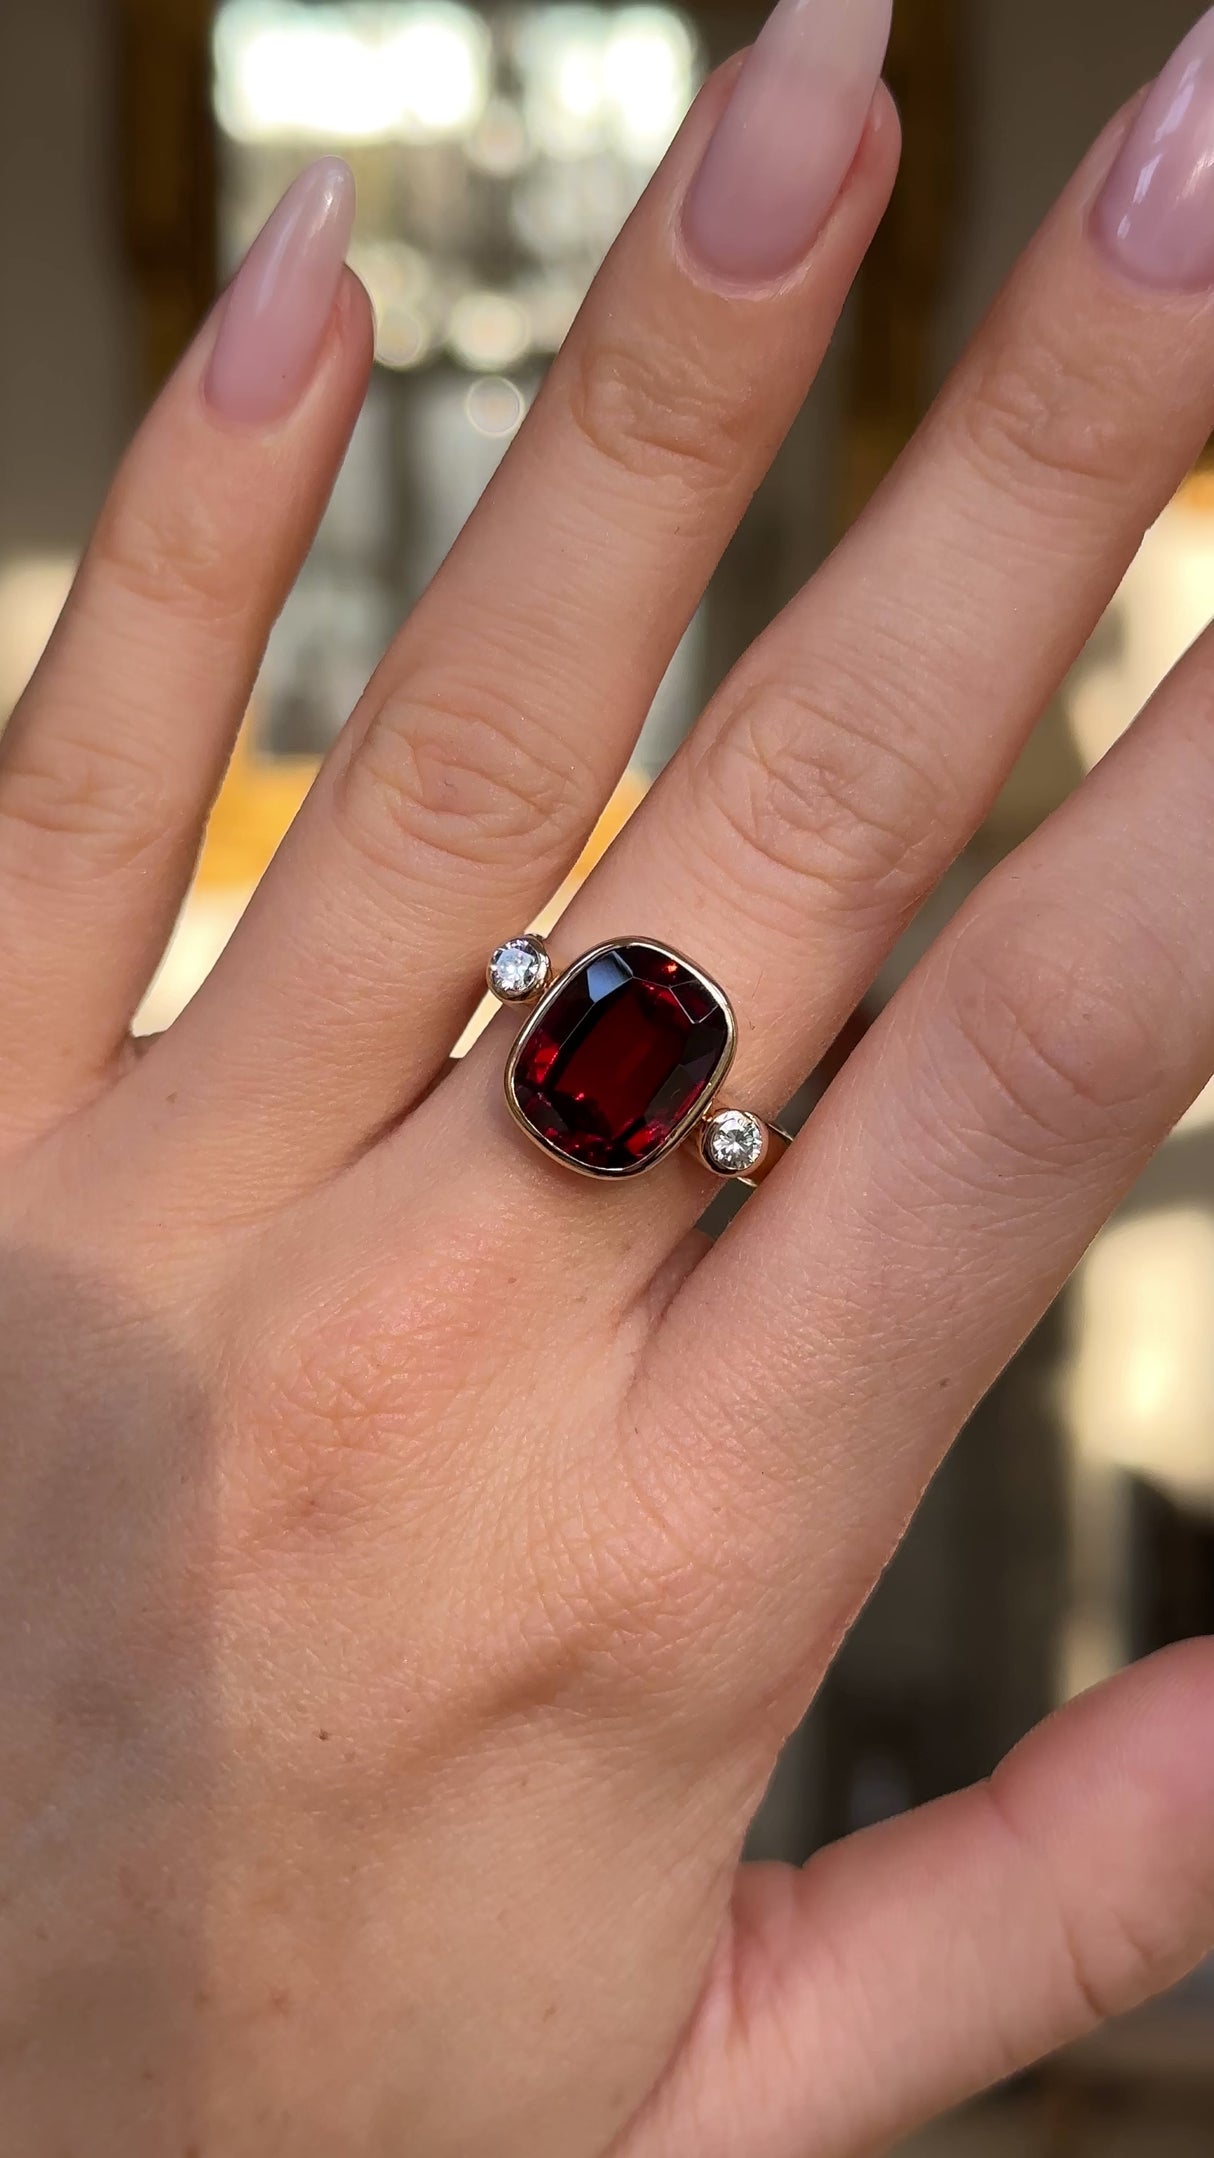 Vintage red zircon and diamond three stone ring worn on hand and moved around to give perspective.